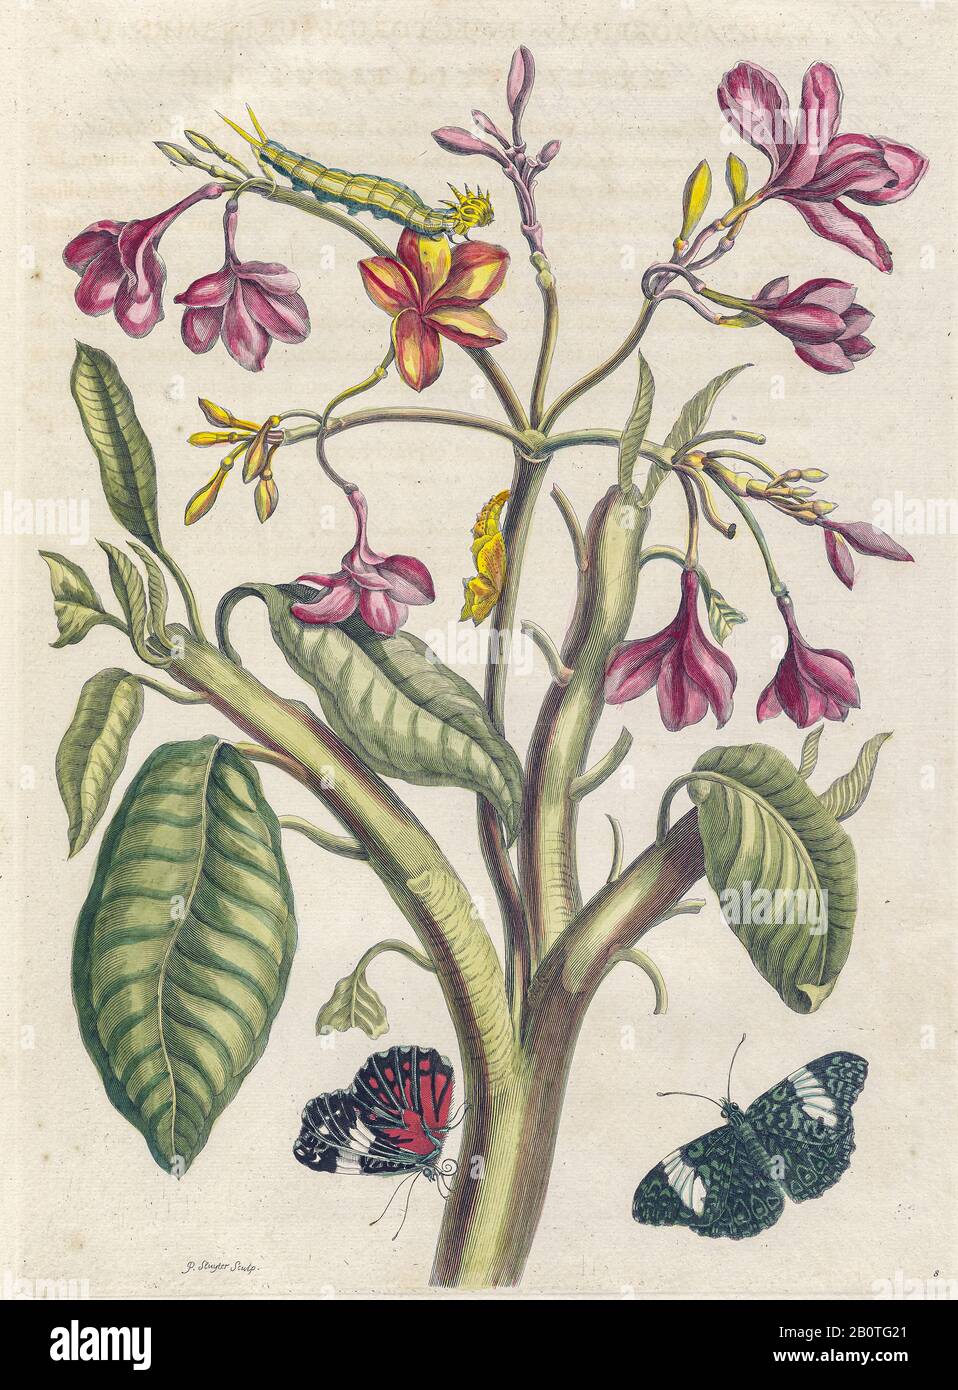 Plumeria from Metamorphosis insectorum Surinamensium (Surinam insects) a hand coloured 18th century Book by Maria Sibylla Merian published in Amsterdam in 1719 Stock Photo